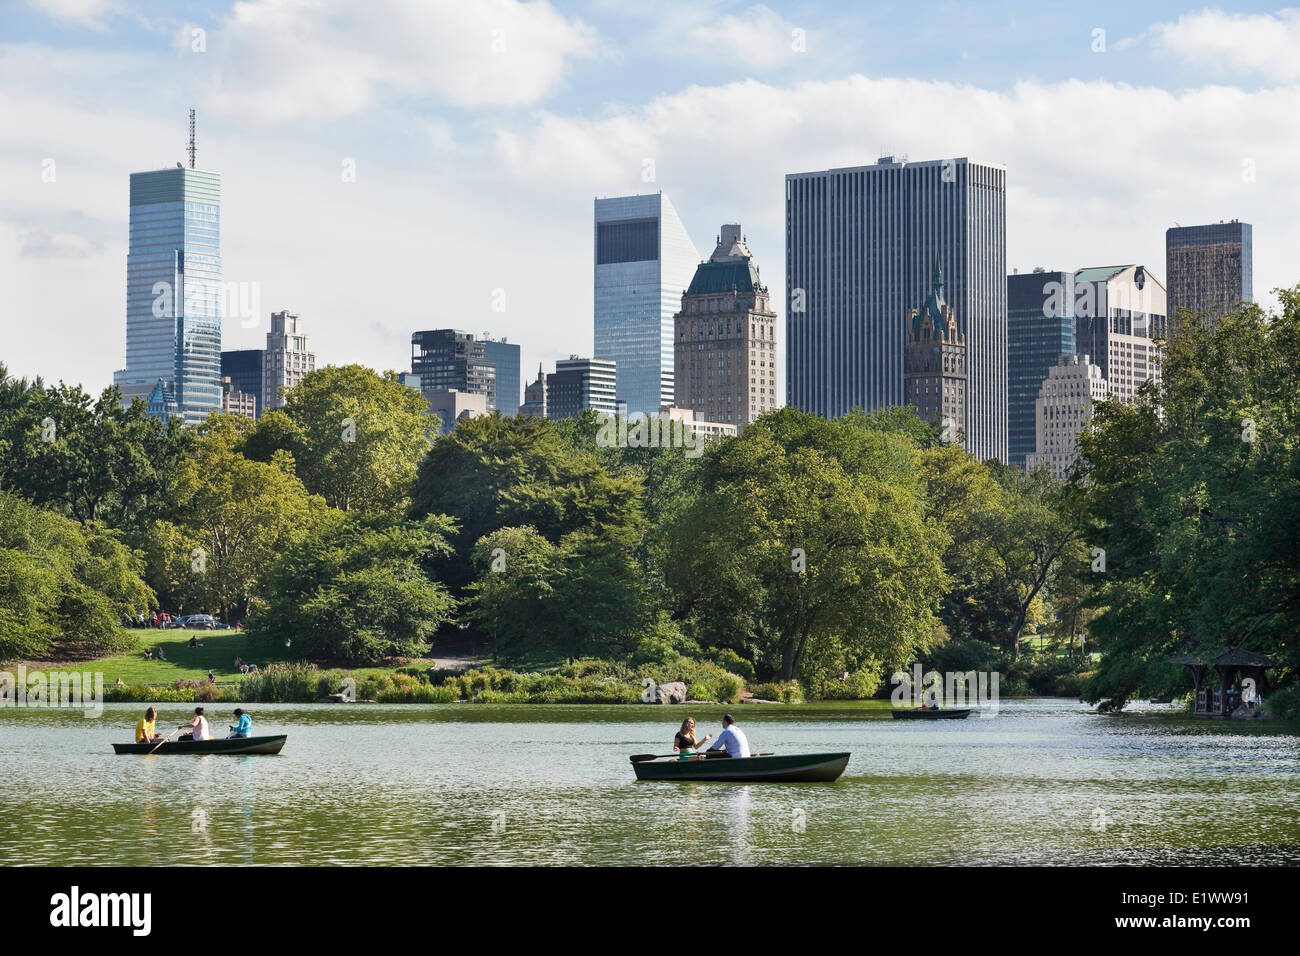 Lush Central Park set against New York City skyscrapers. In the foreground is the Lake where parkgoes can rent row boats relax Stock Photo